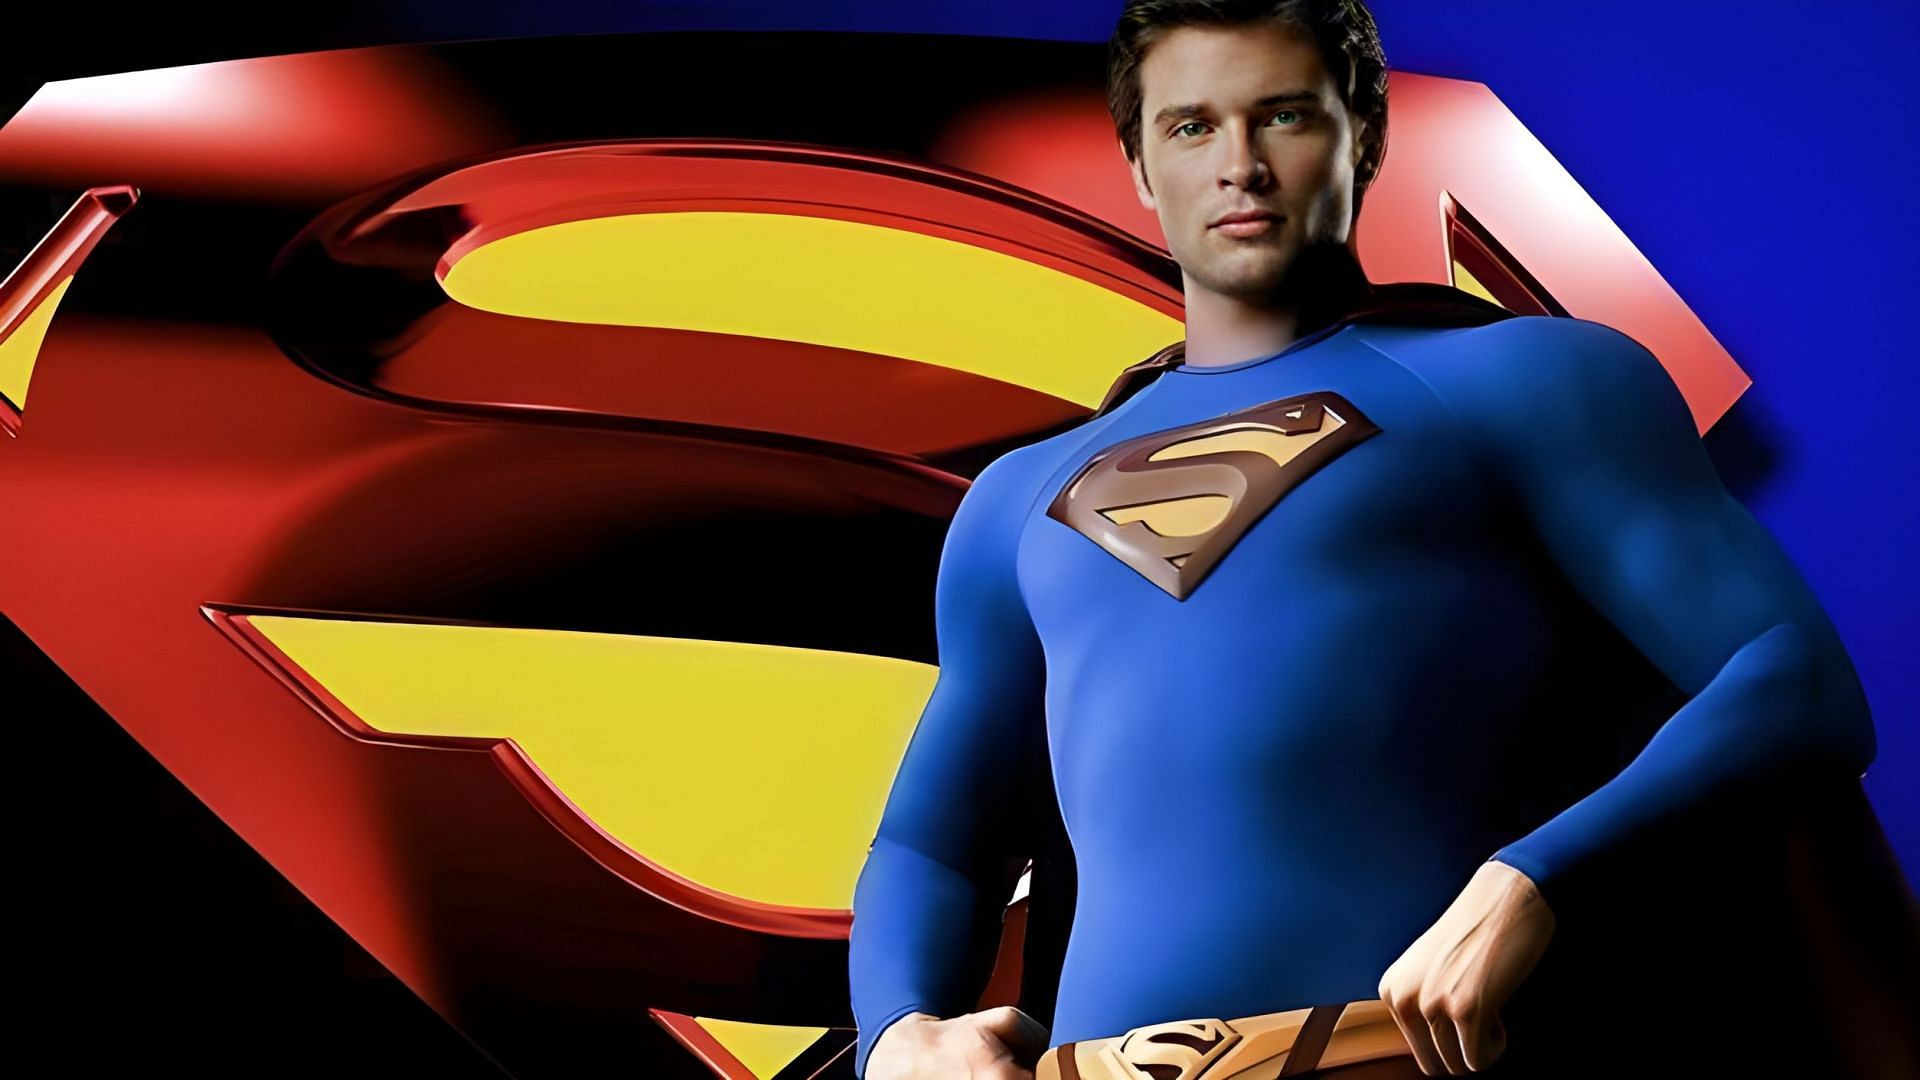 Tom Welling&#039;s Superman costume in the TV series Smallville was designed to showcase the character&#039;s evolution. (Image via DC)